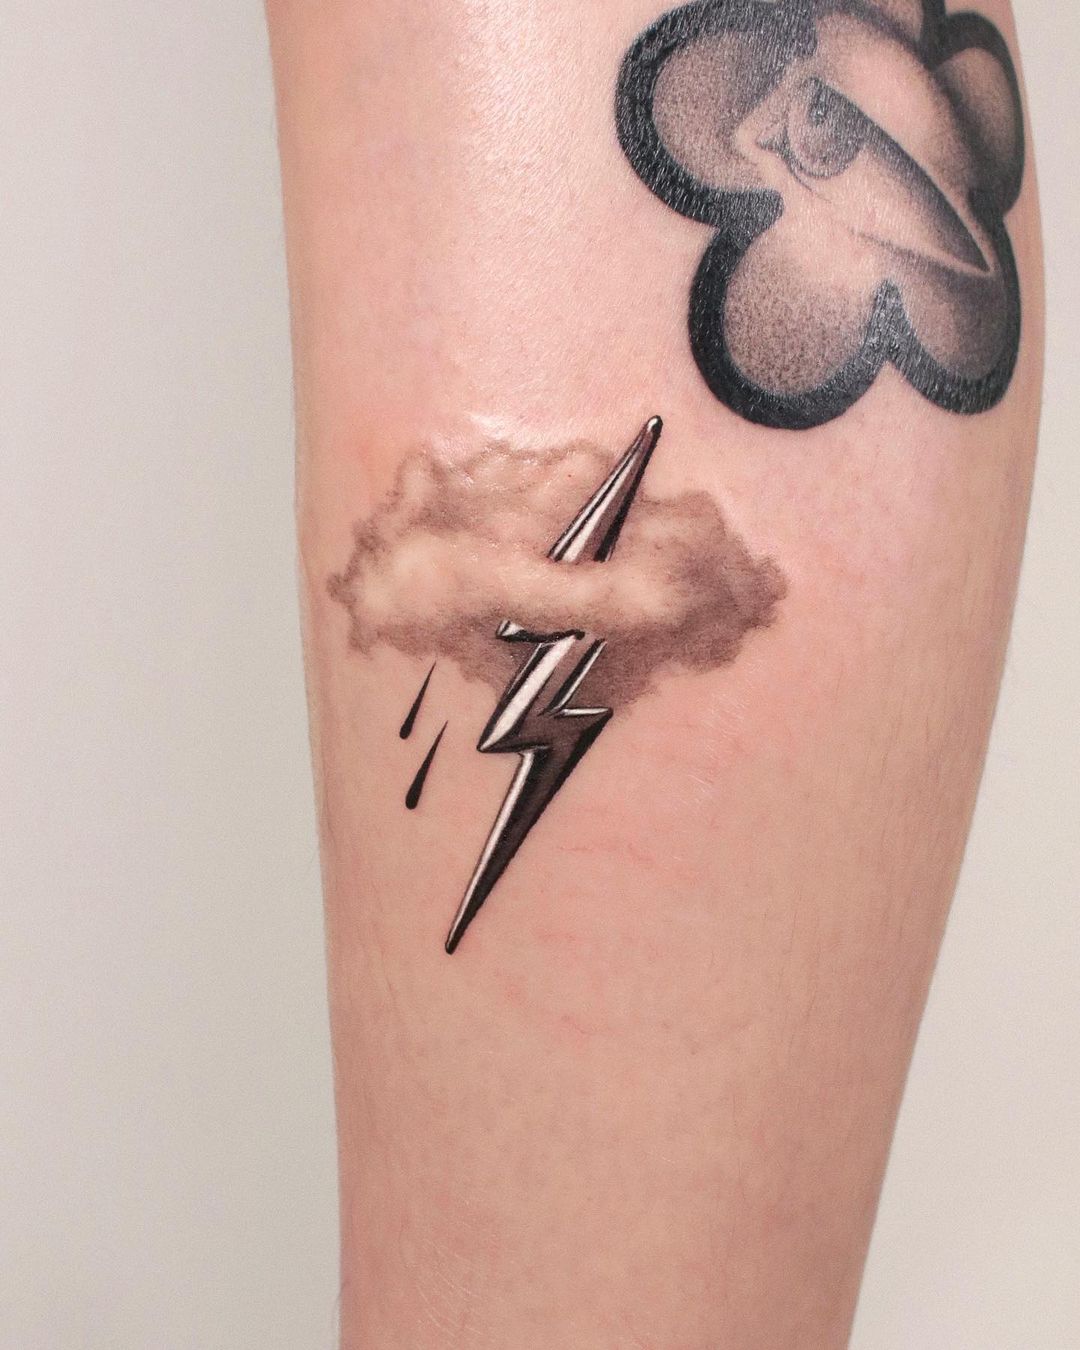 Cloud tattoos on forearm by shooin.tattoo